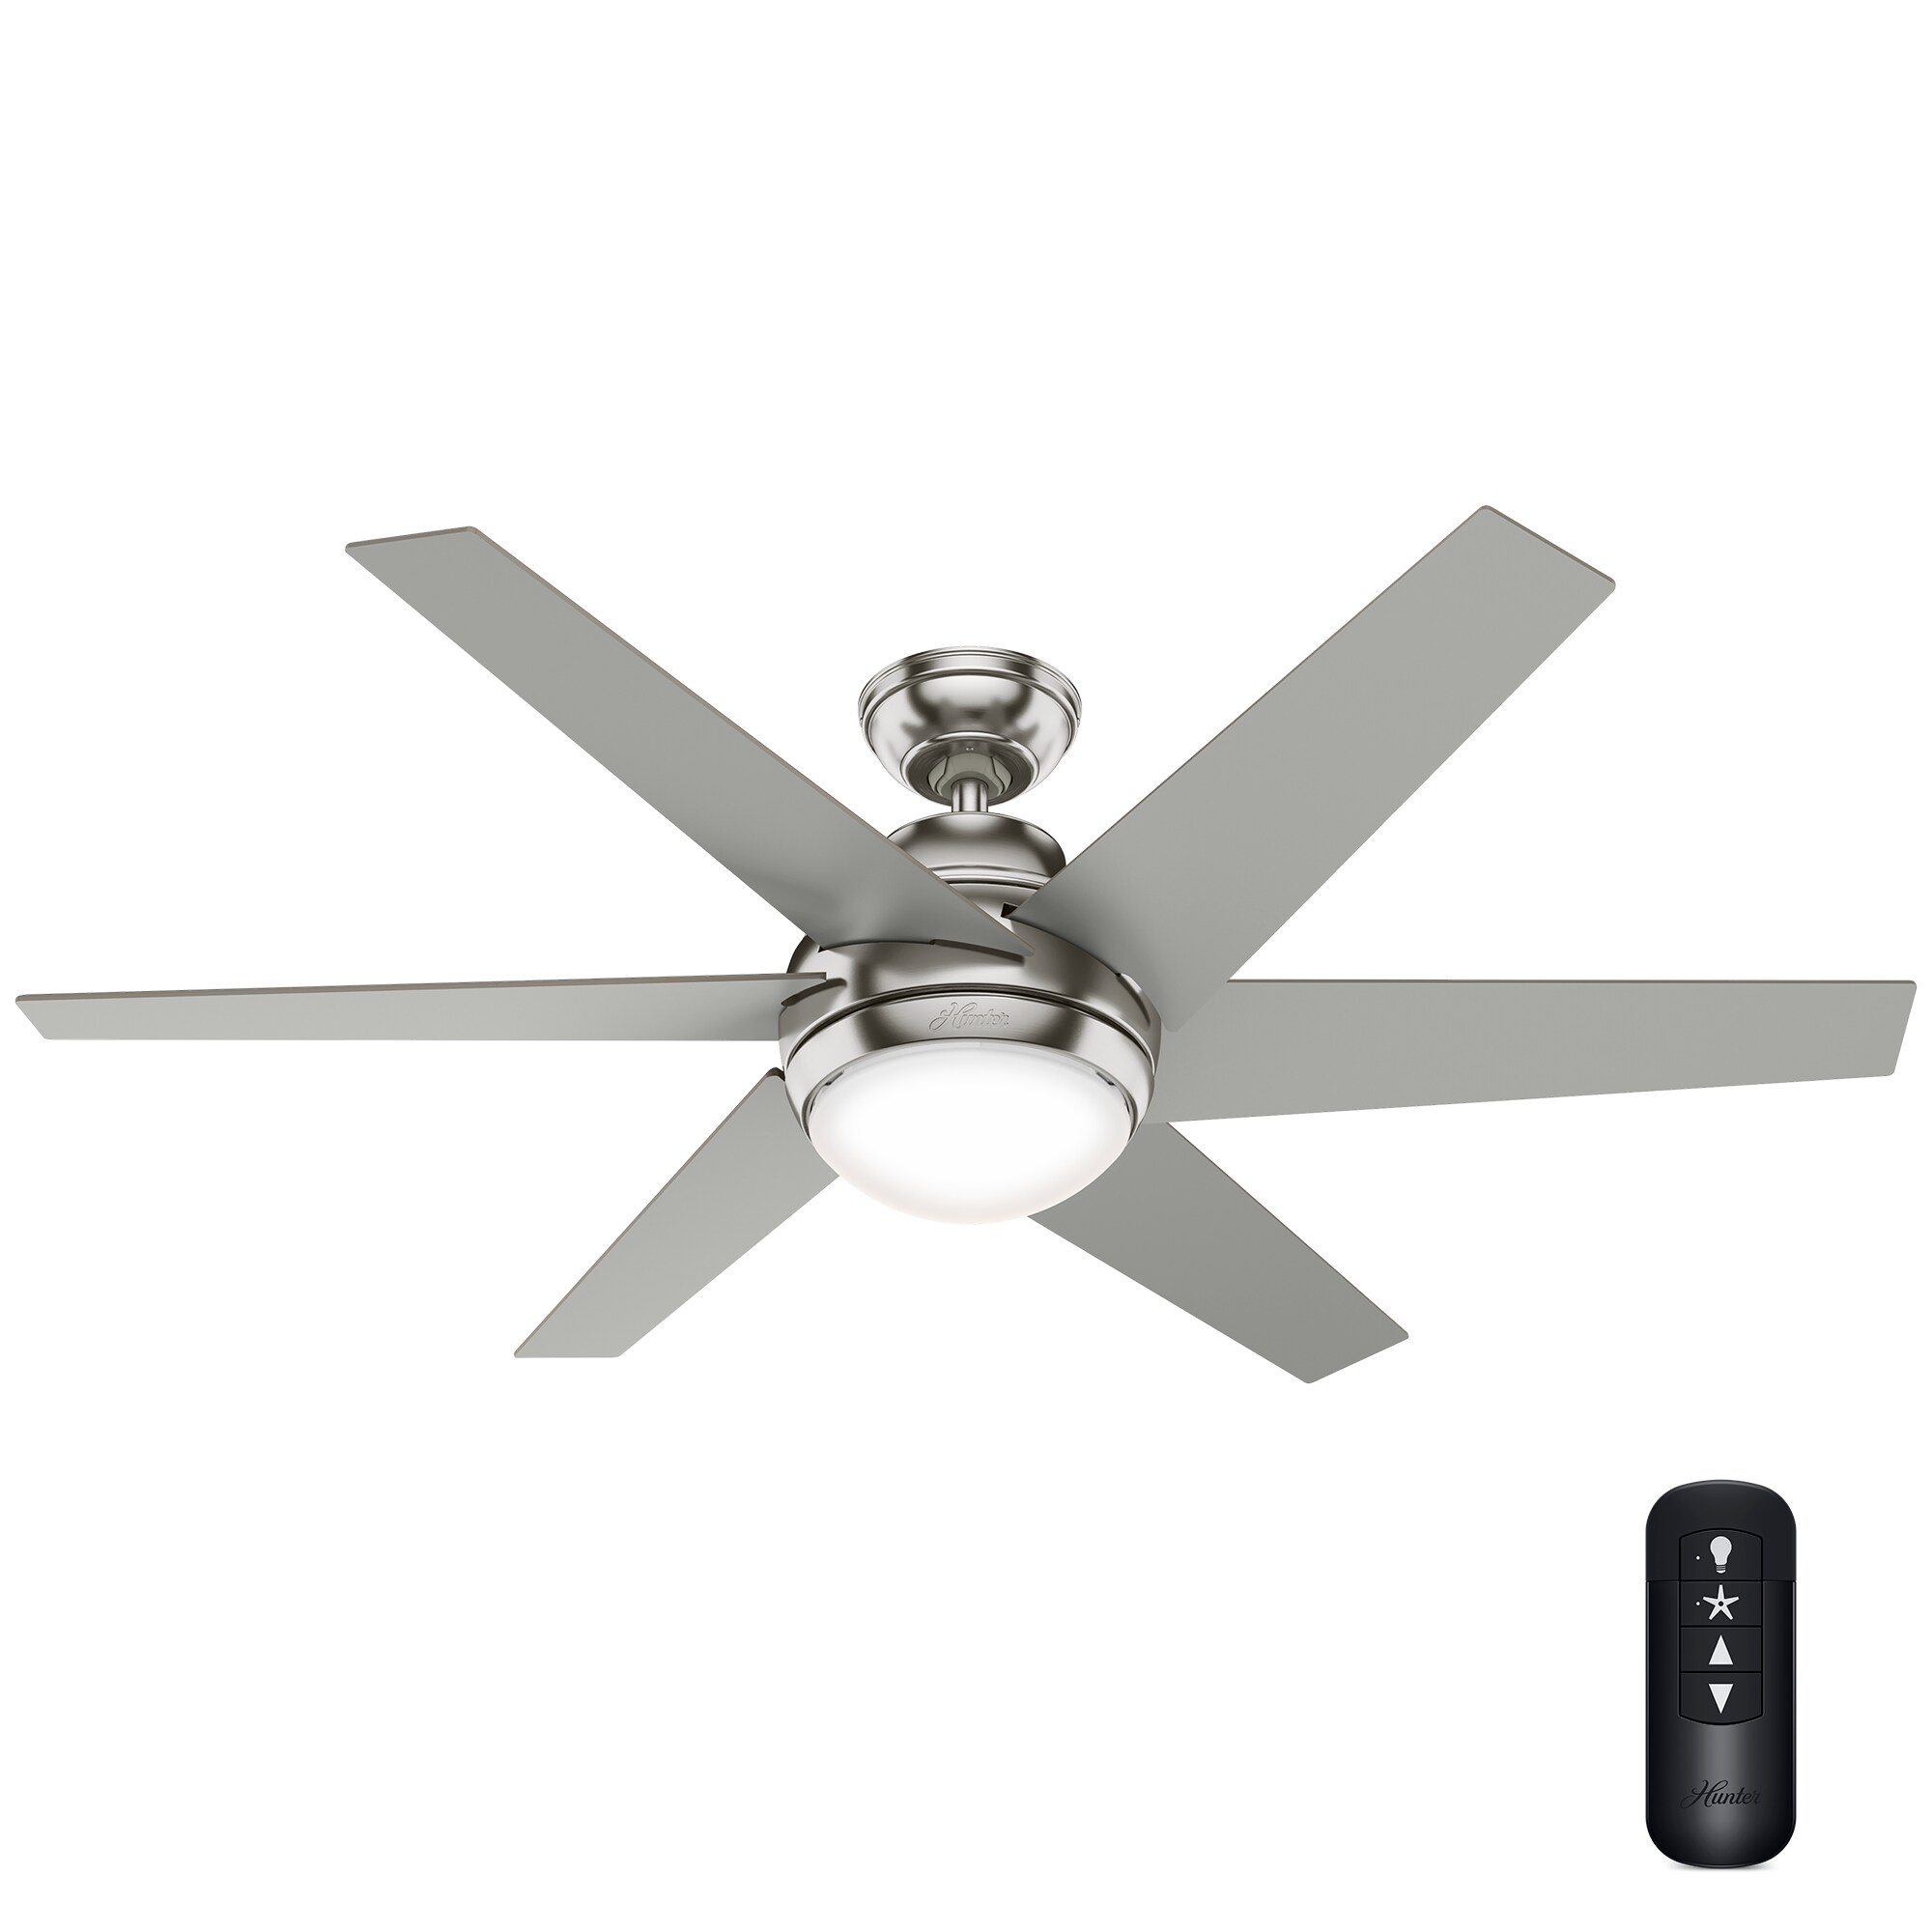 Brushed Nickel Led Indoor Ceiling Fan, Satin Nickel Bathroom Exhaust Fan With Light And Remote